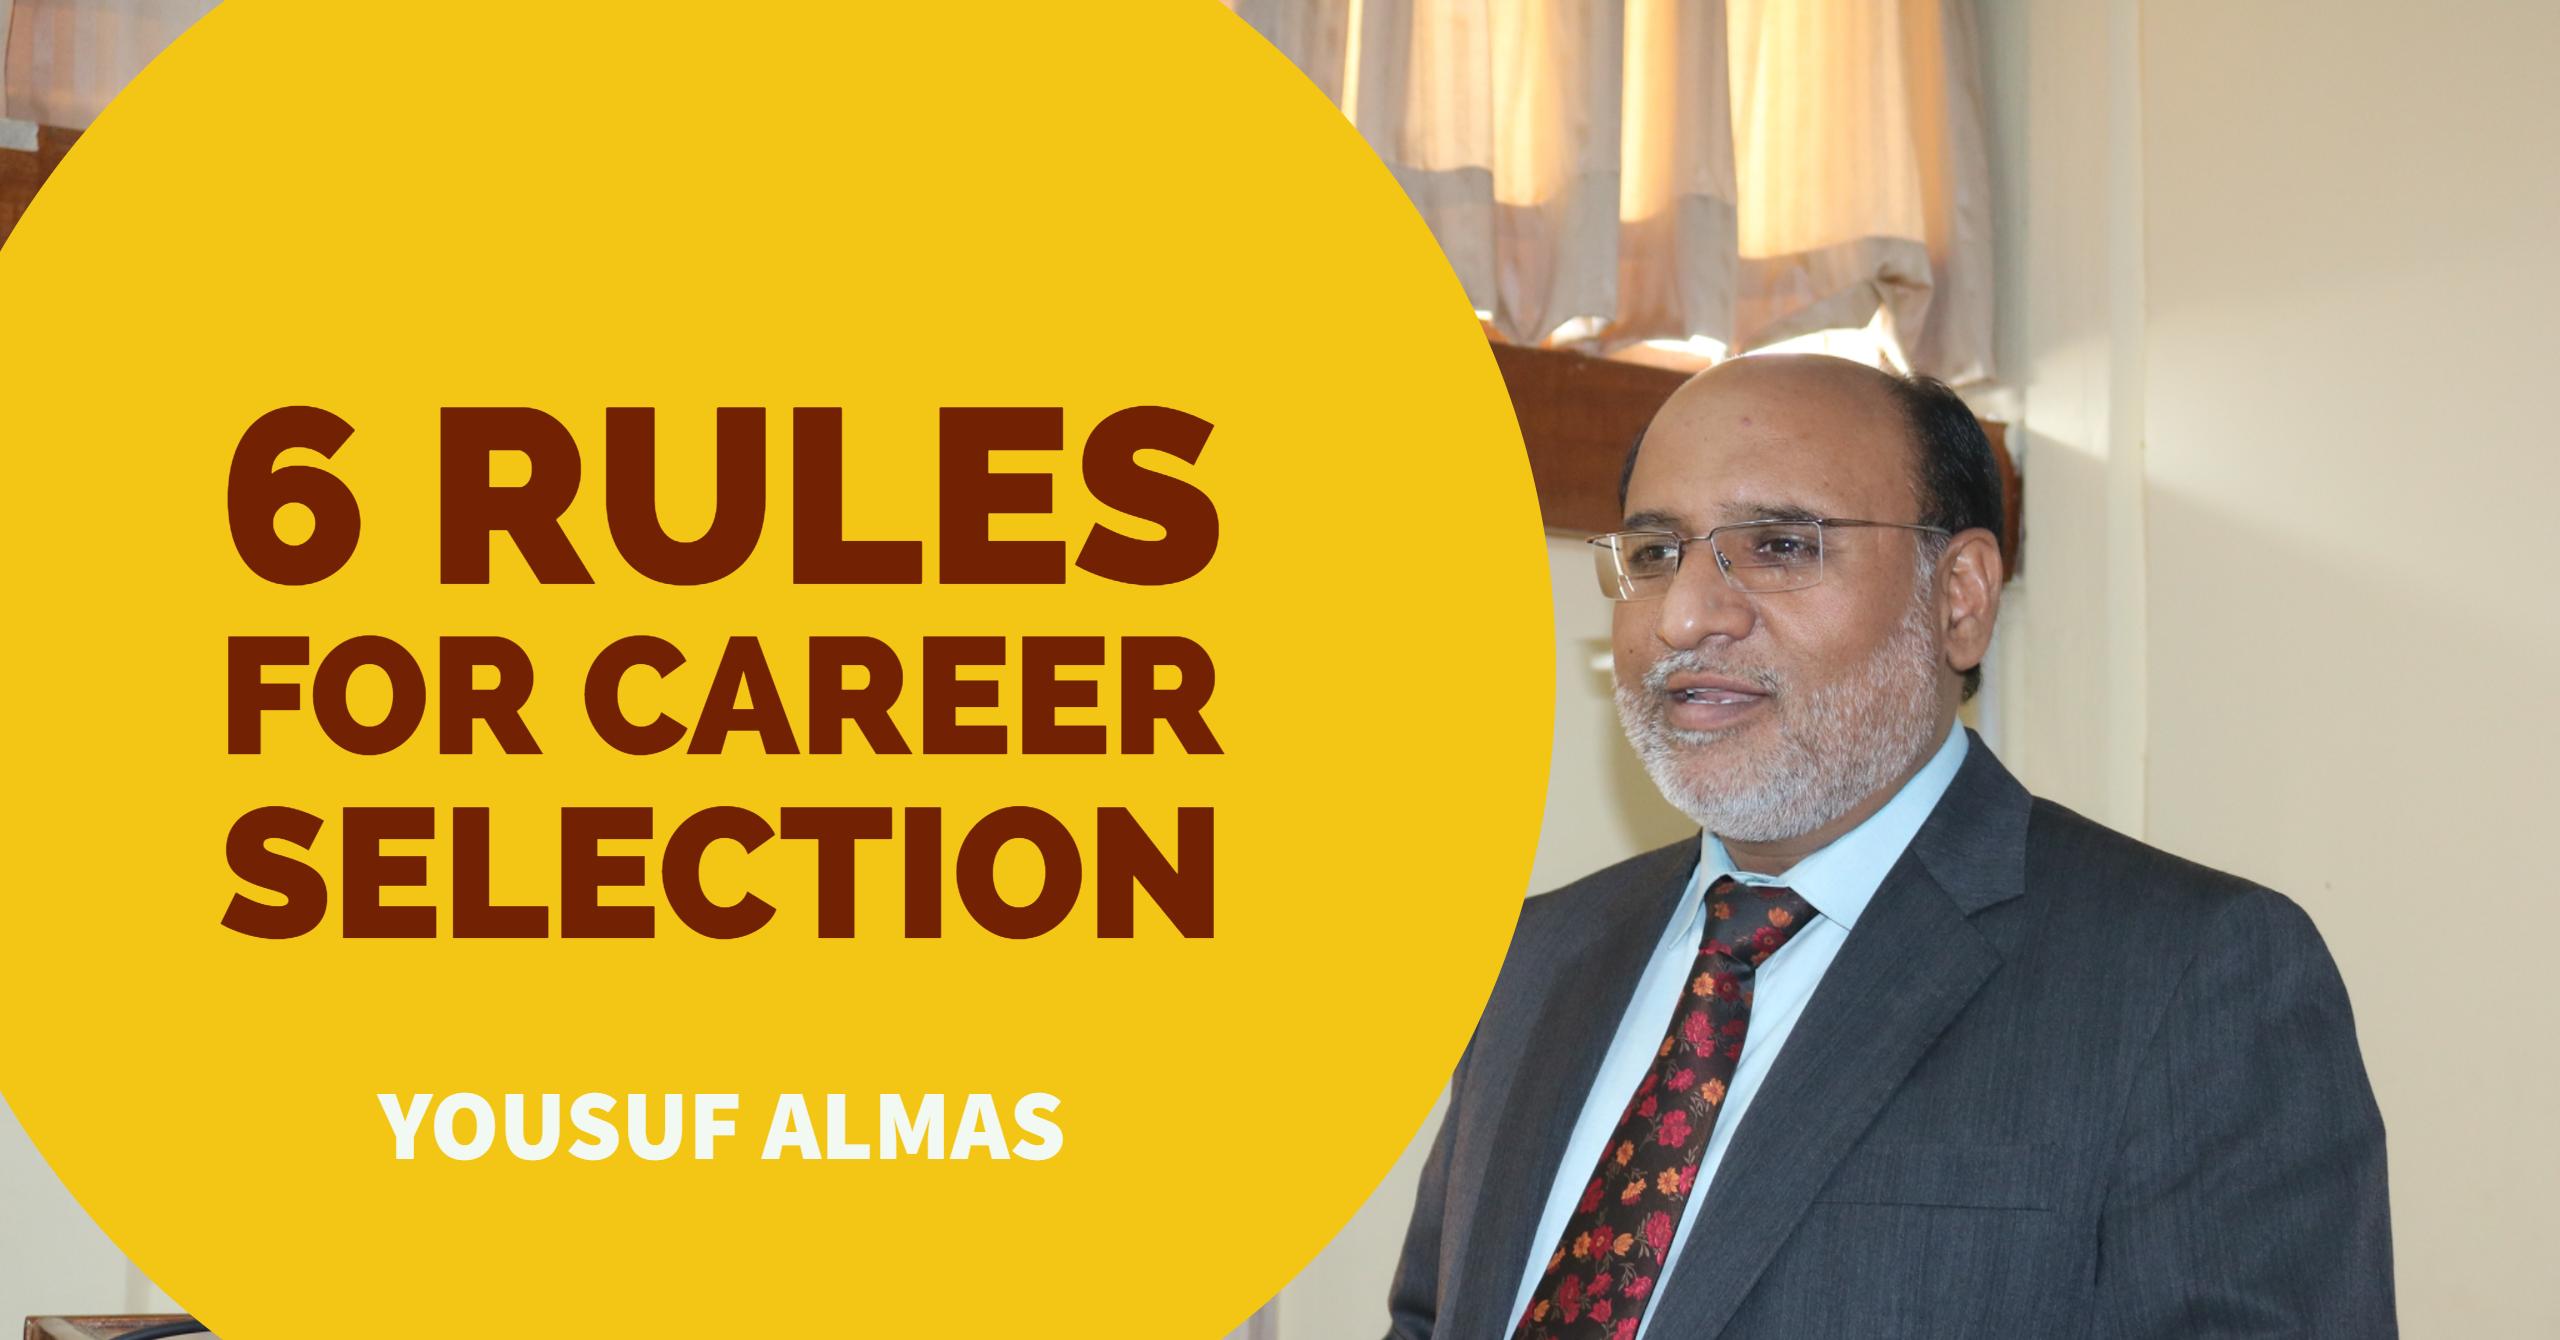 6 Rules for Career Selection 